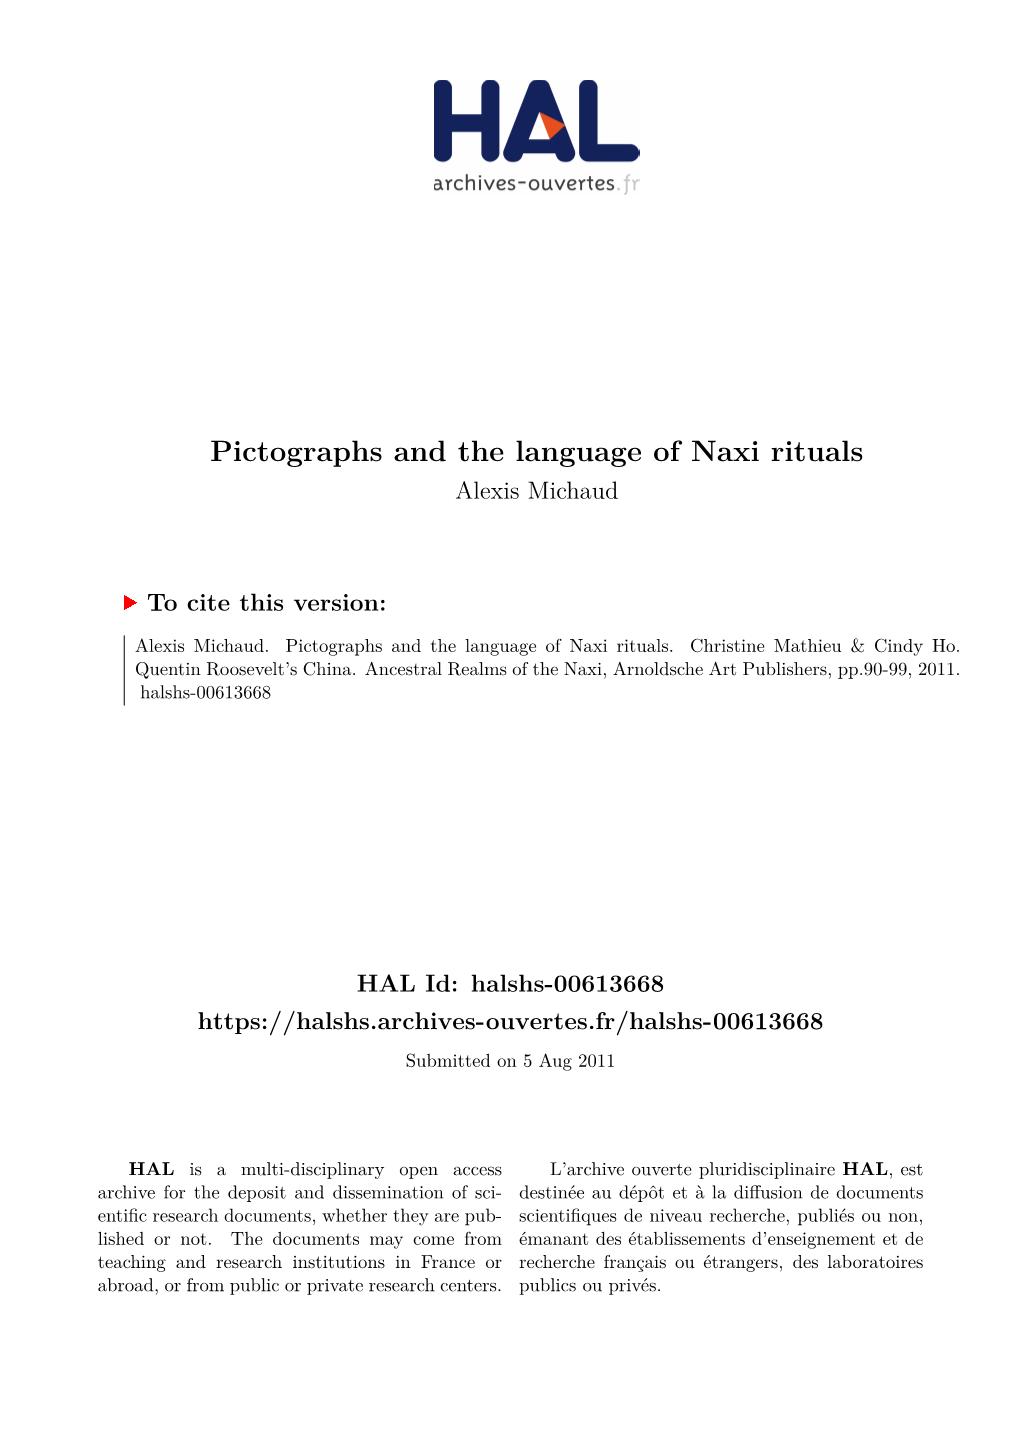 Pictographs and the Language of Naxi Rituals Alexis Michaud